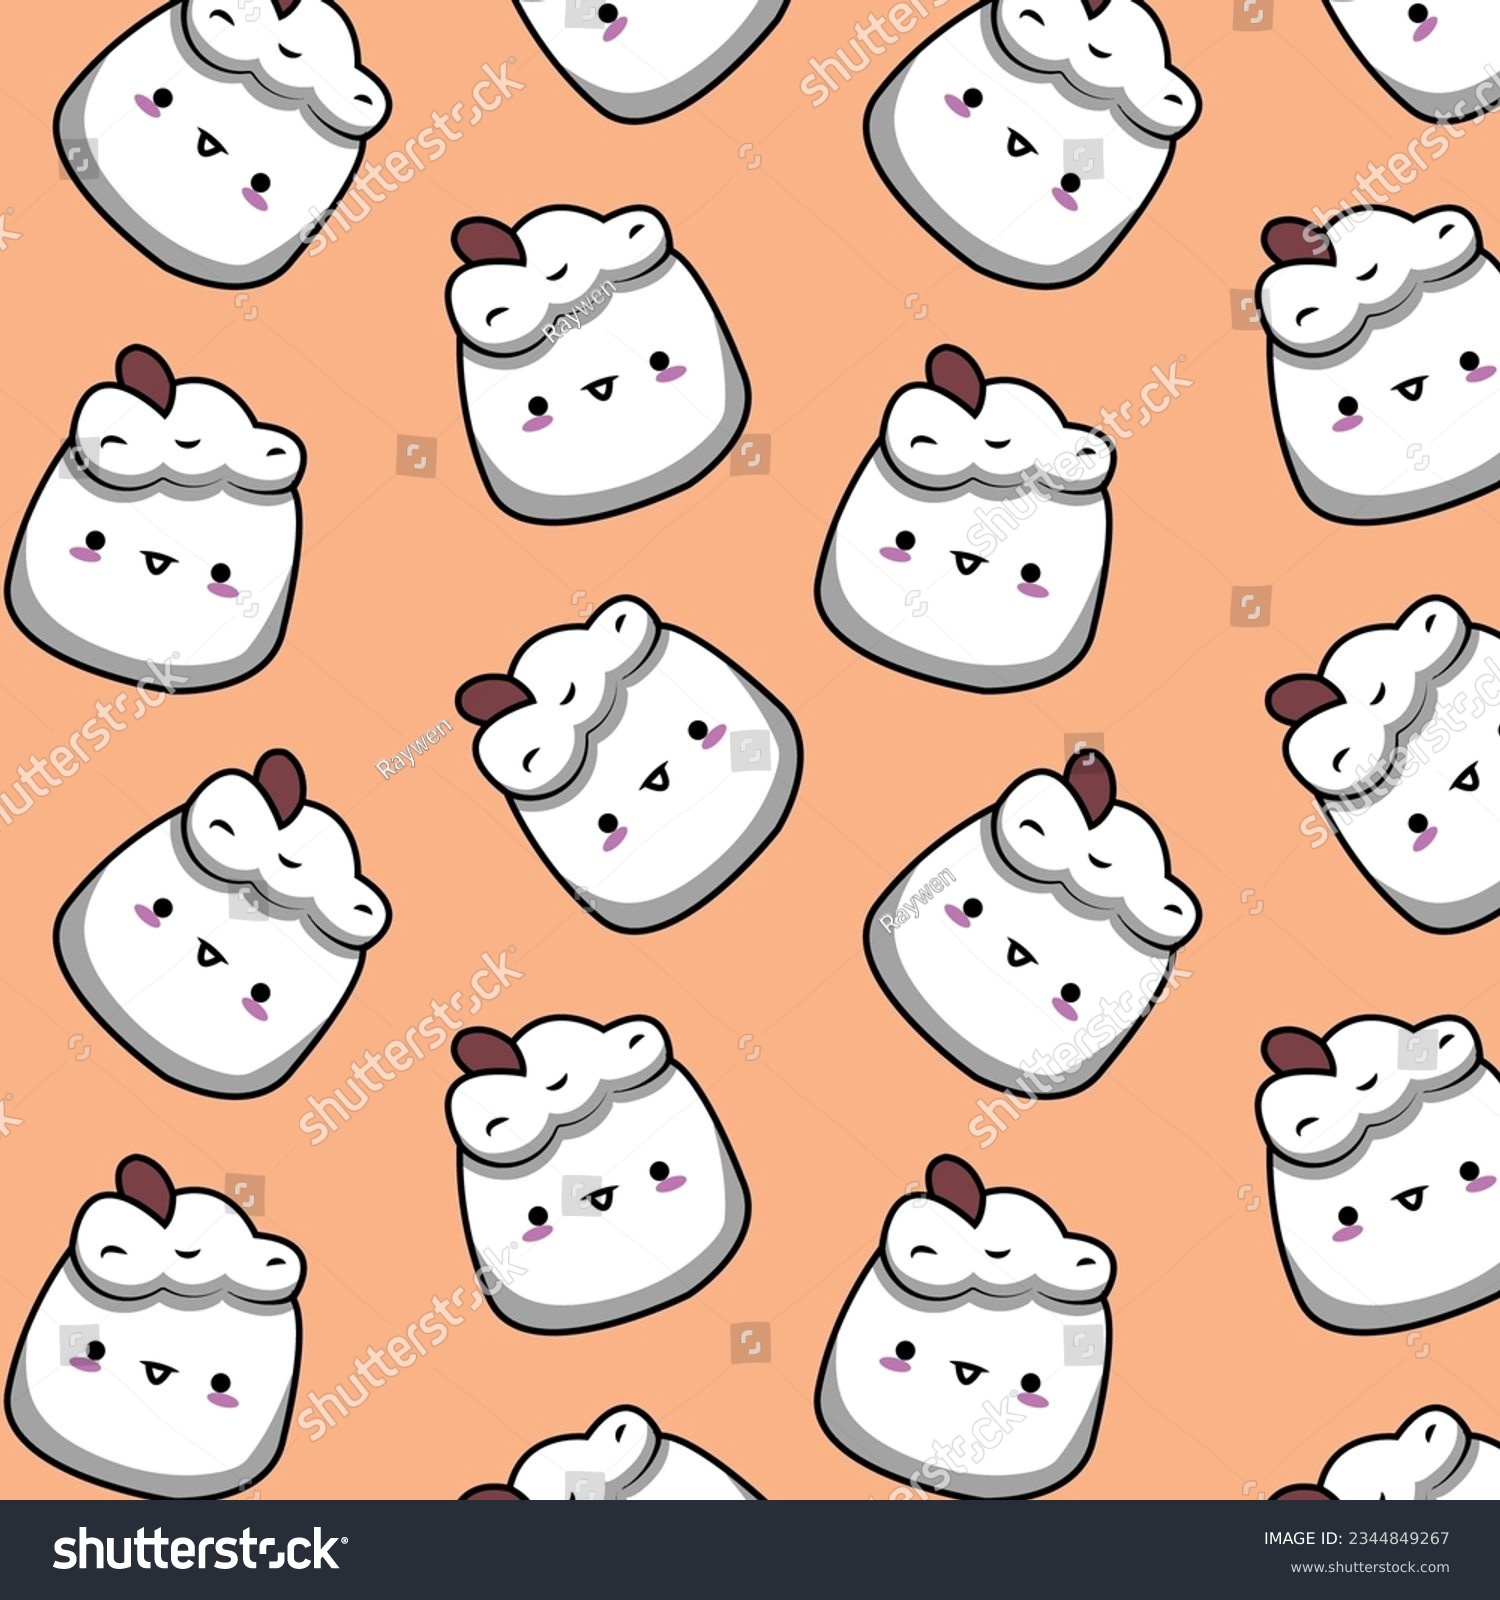 SVG of cute kawaii milk and cookie monster seamless pattern in pink background for children toys and fashion svg